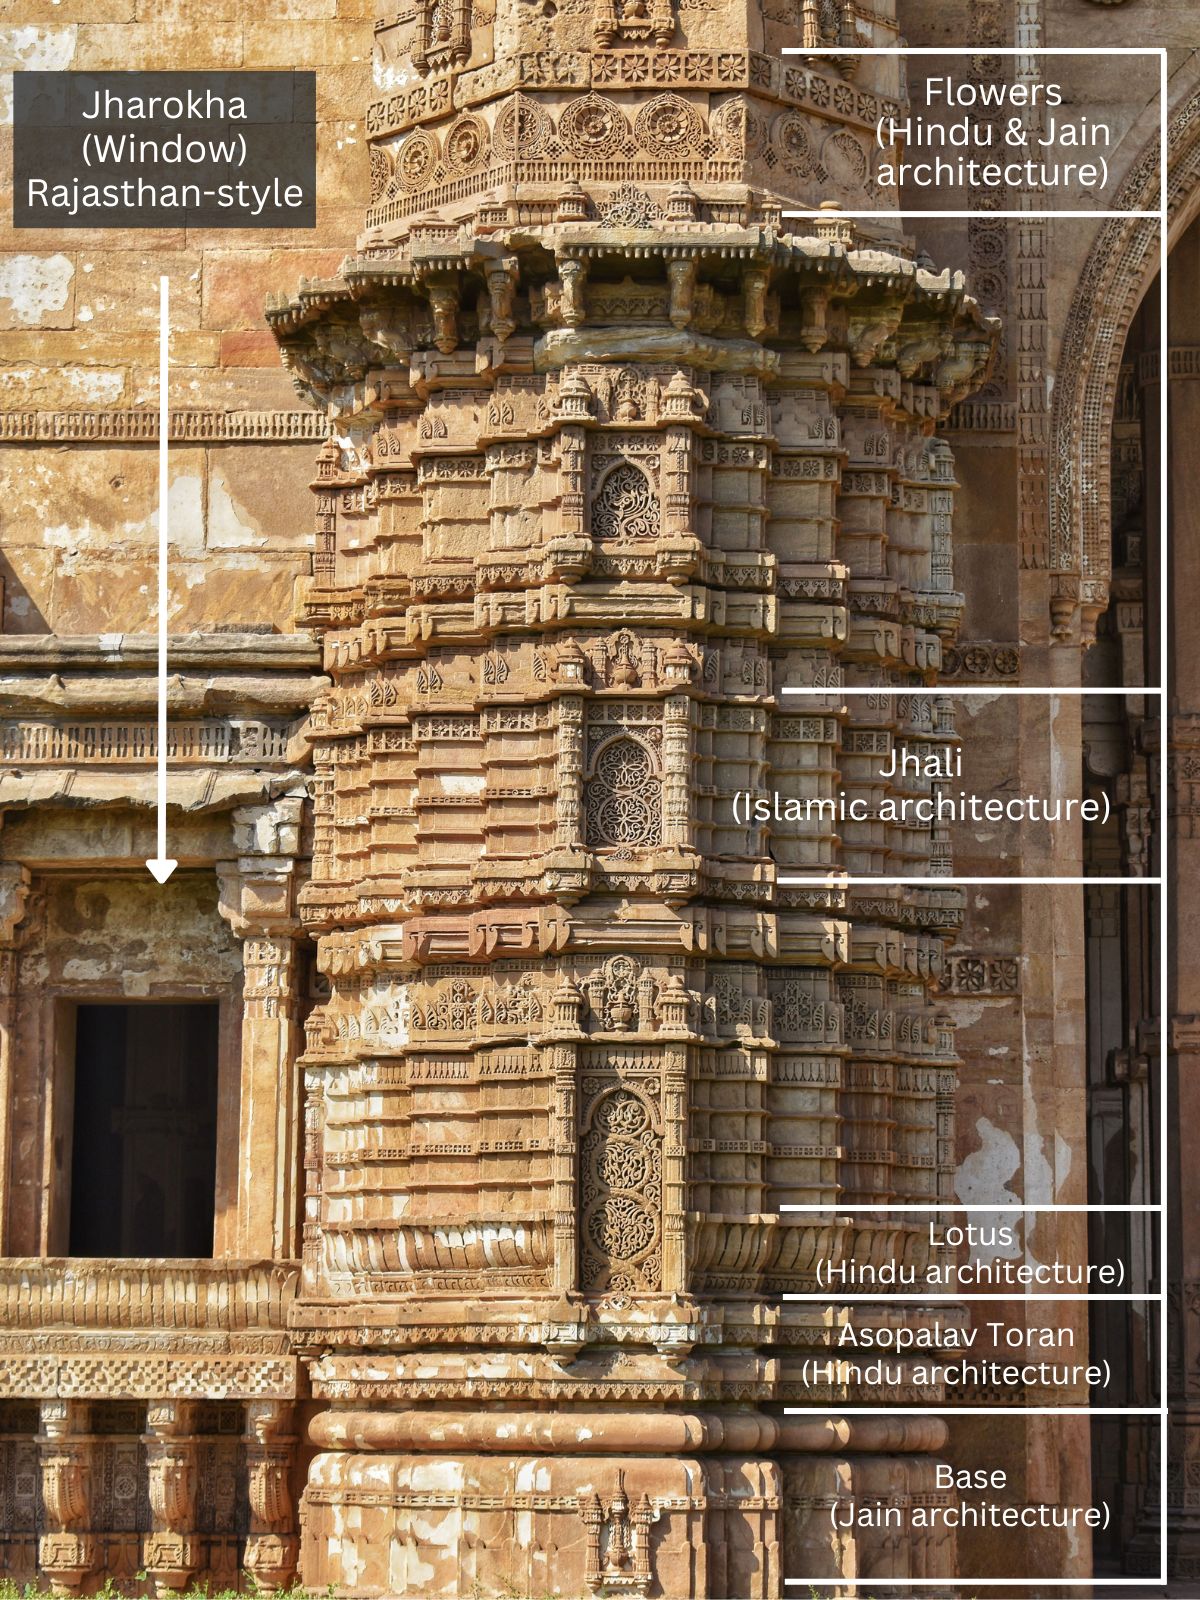 An intricate carving and unique jhali design at the base of the minaret in Champaner